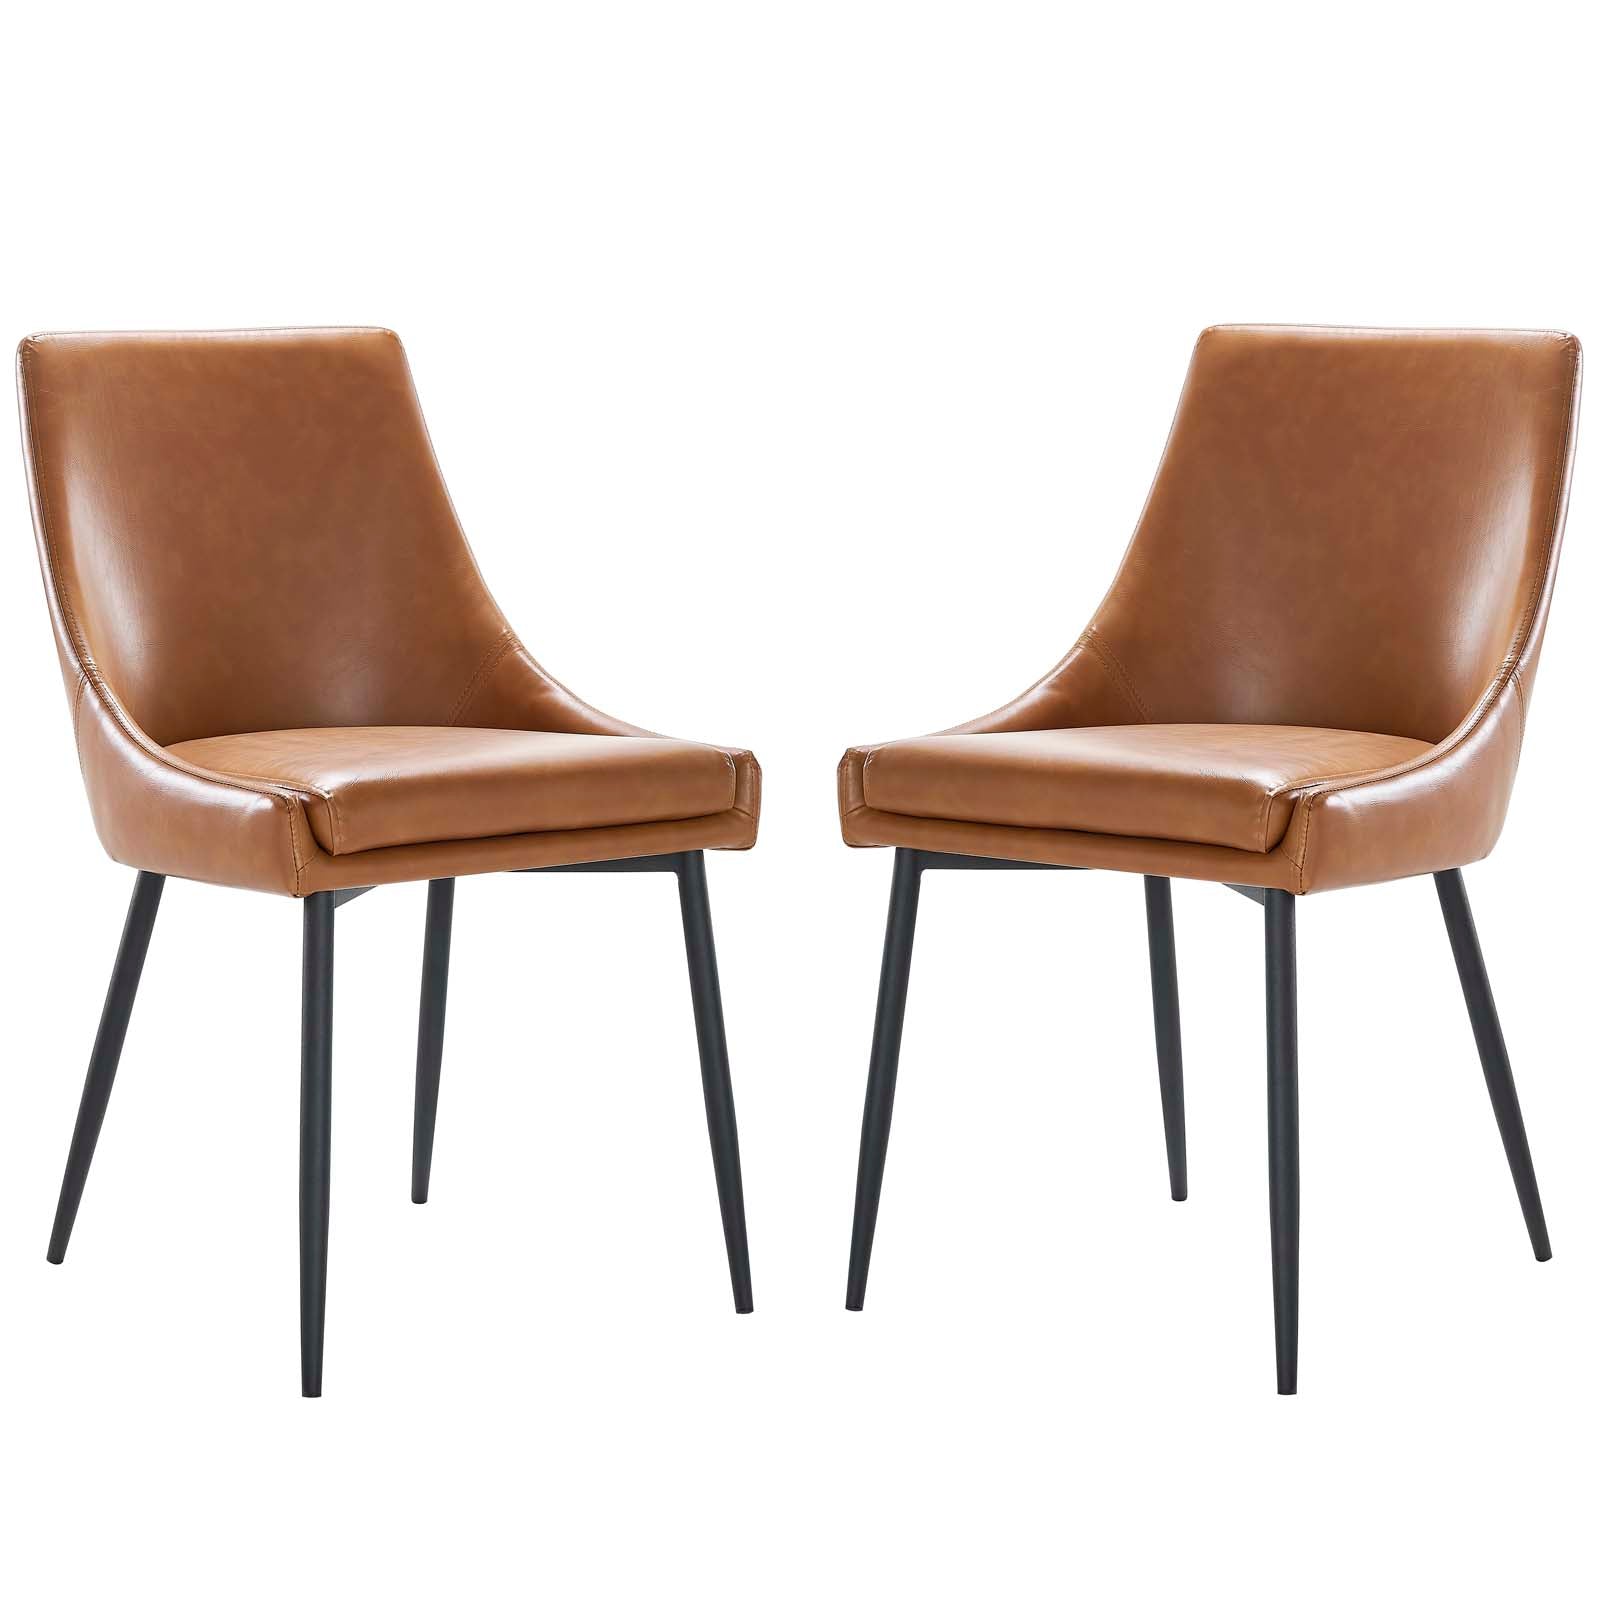 Modway Dining Chairs - Viscount Vegan Leather Dining Chairs - Set Of 2 Black Tan